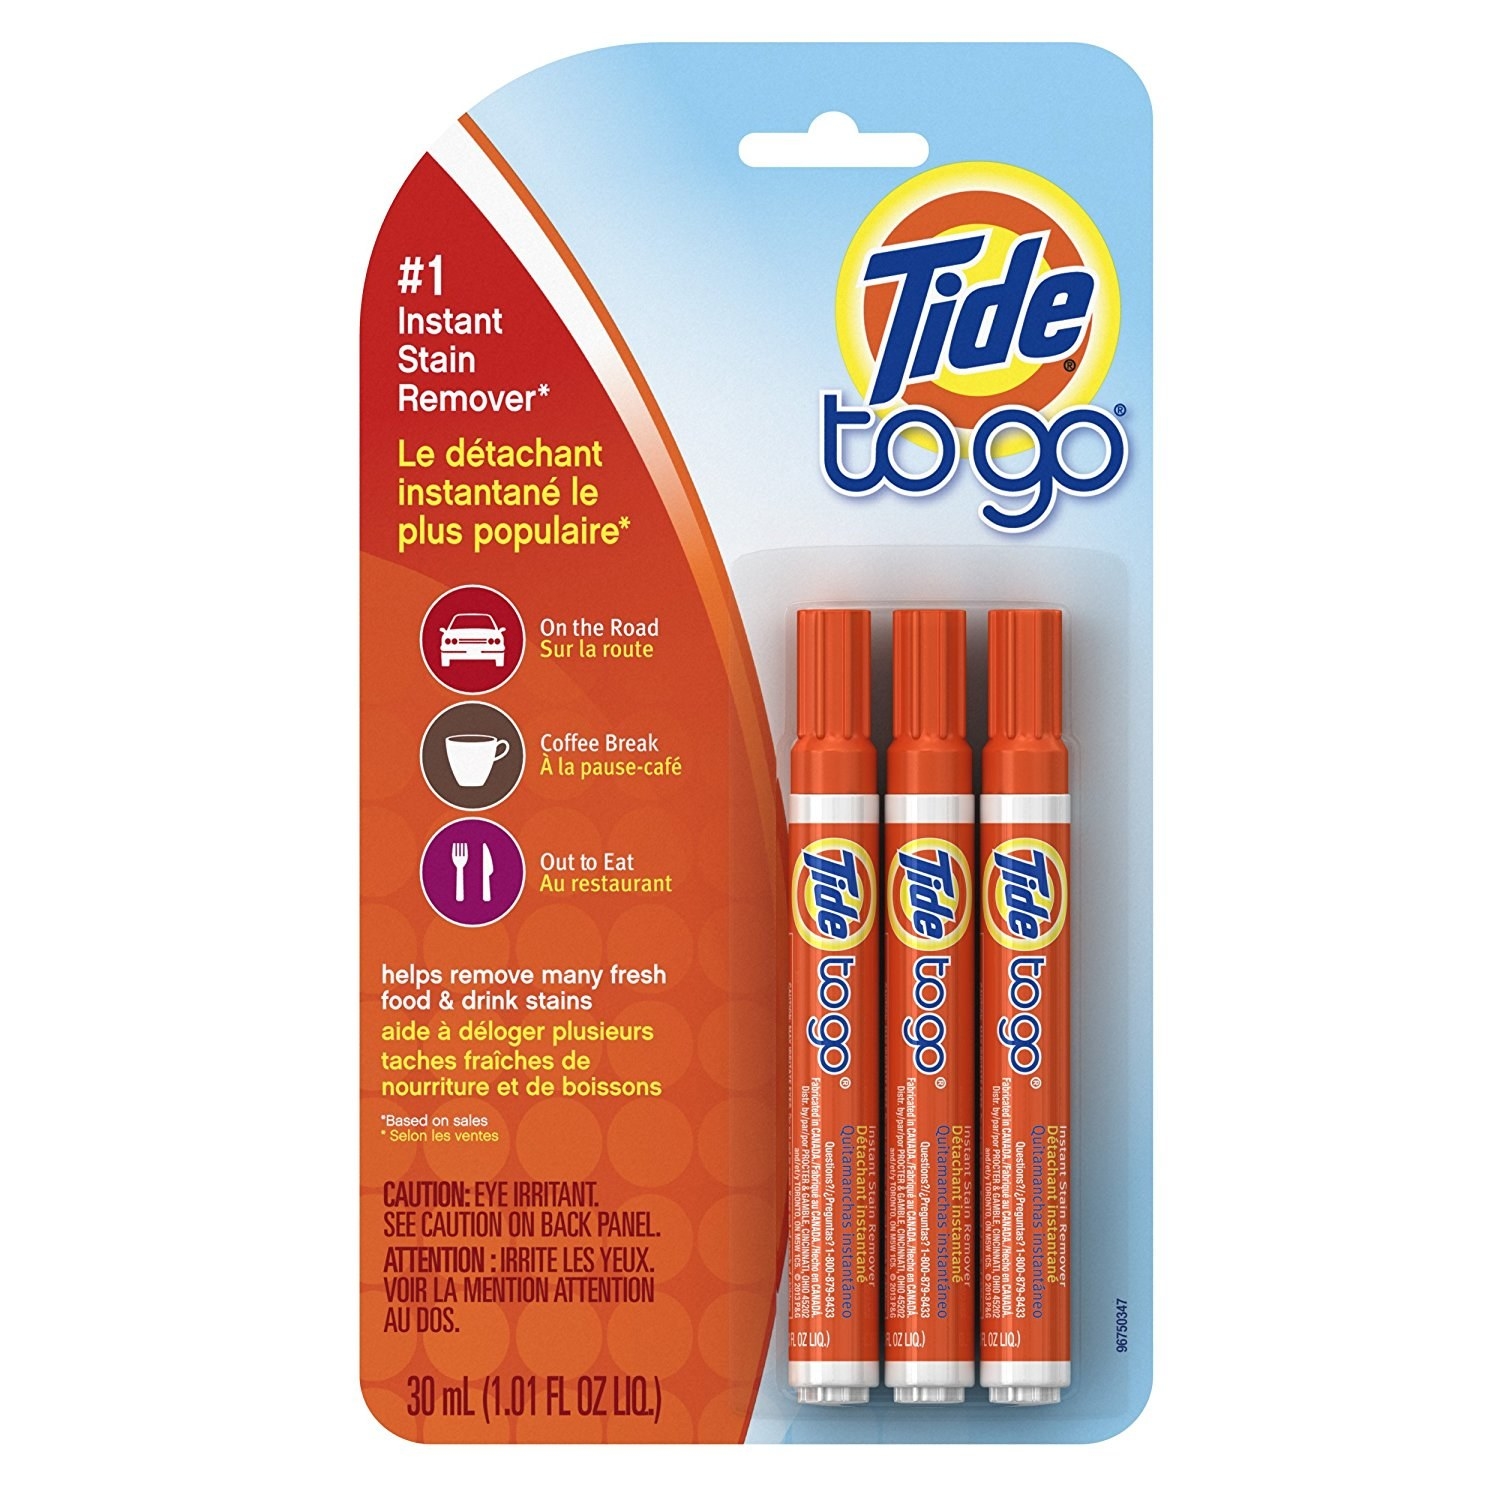 Tide making vapes now too.